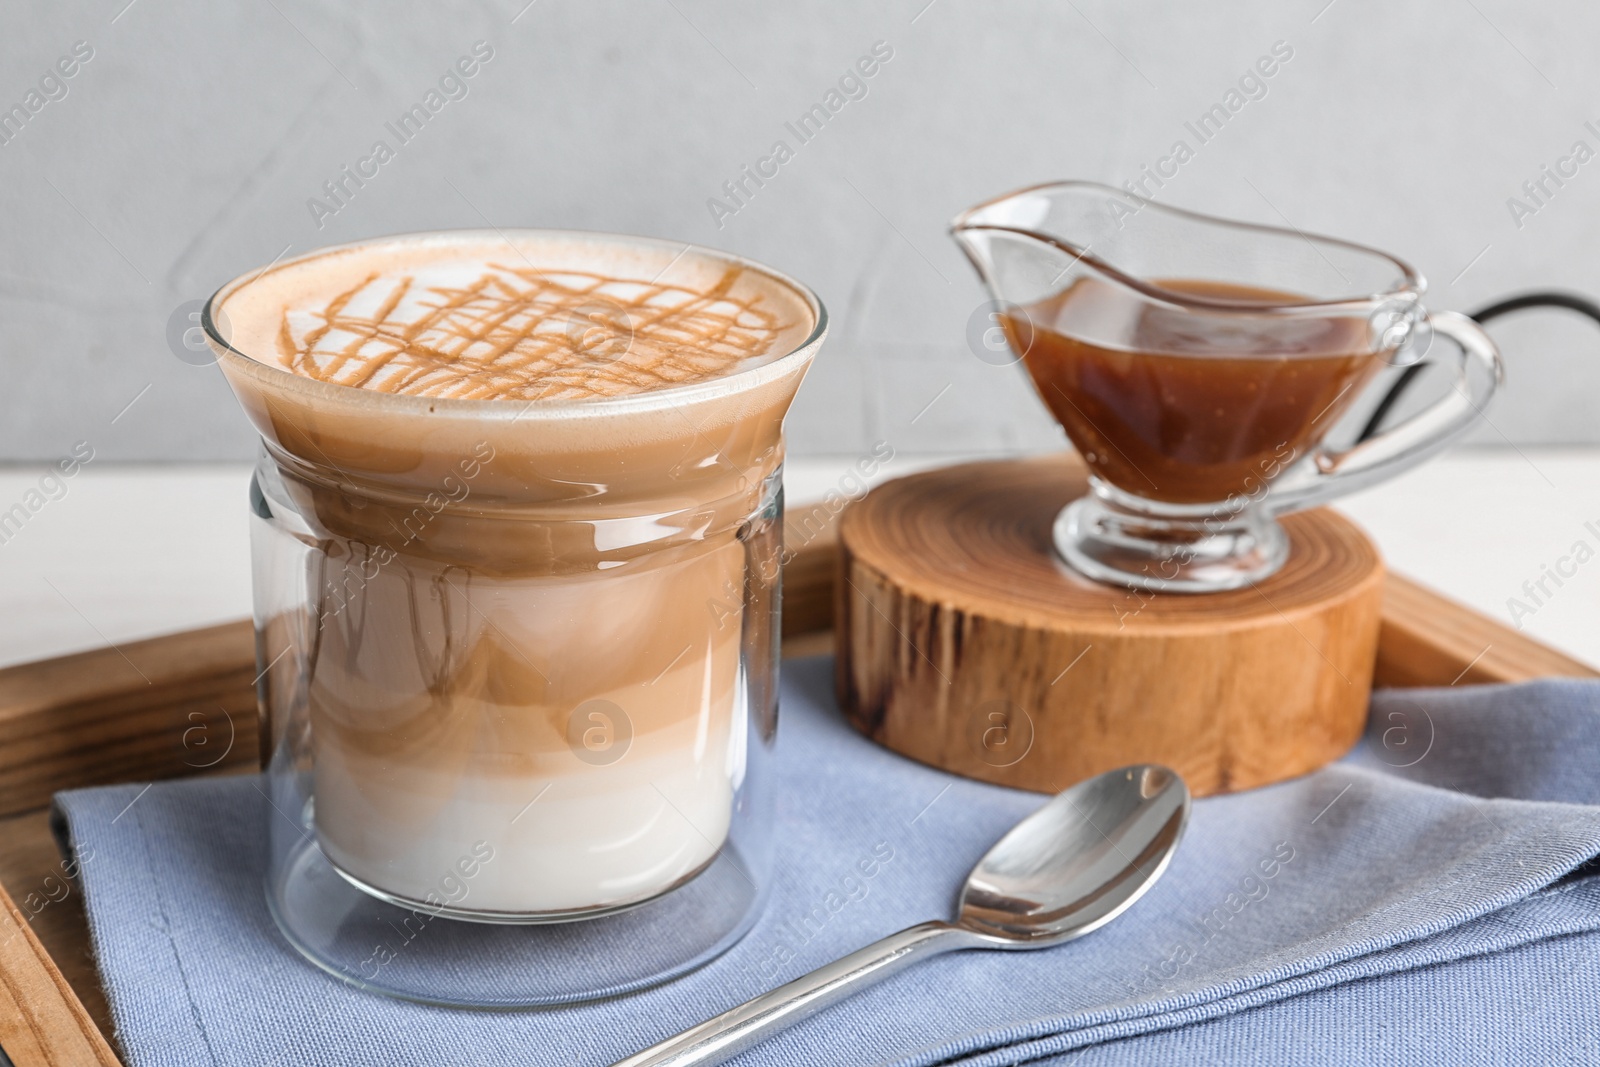 Photo of Glass of caramel macchiato and gravy boat with sauce on table